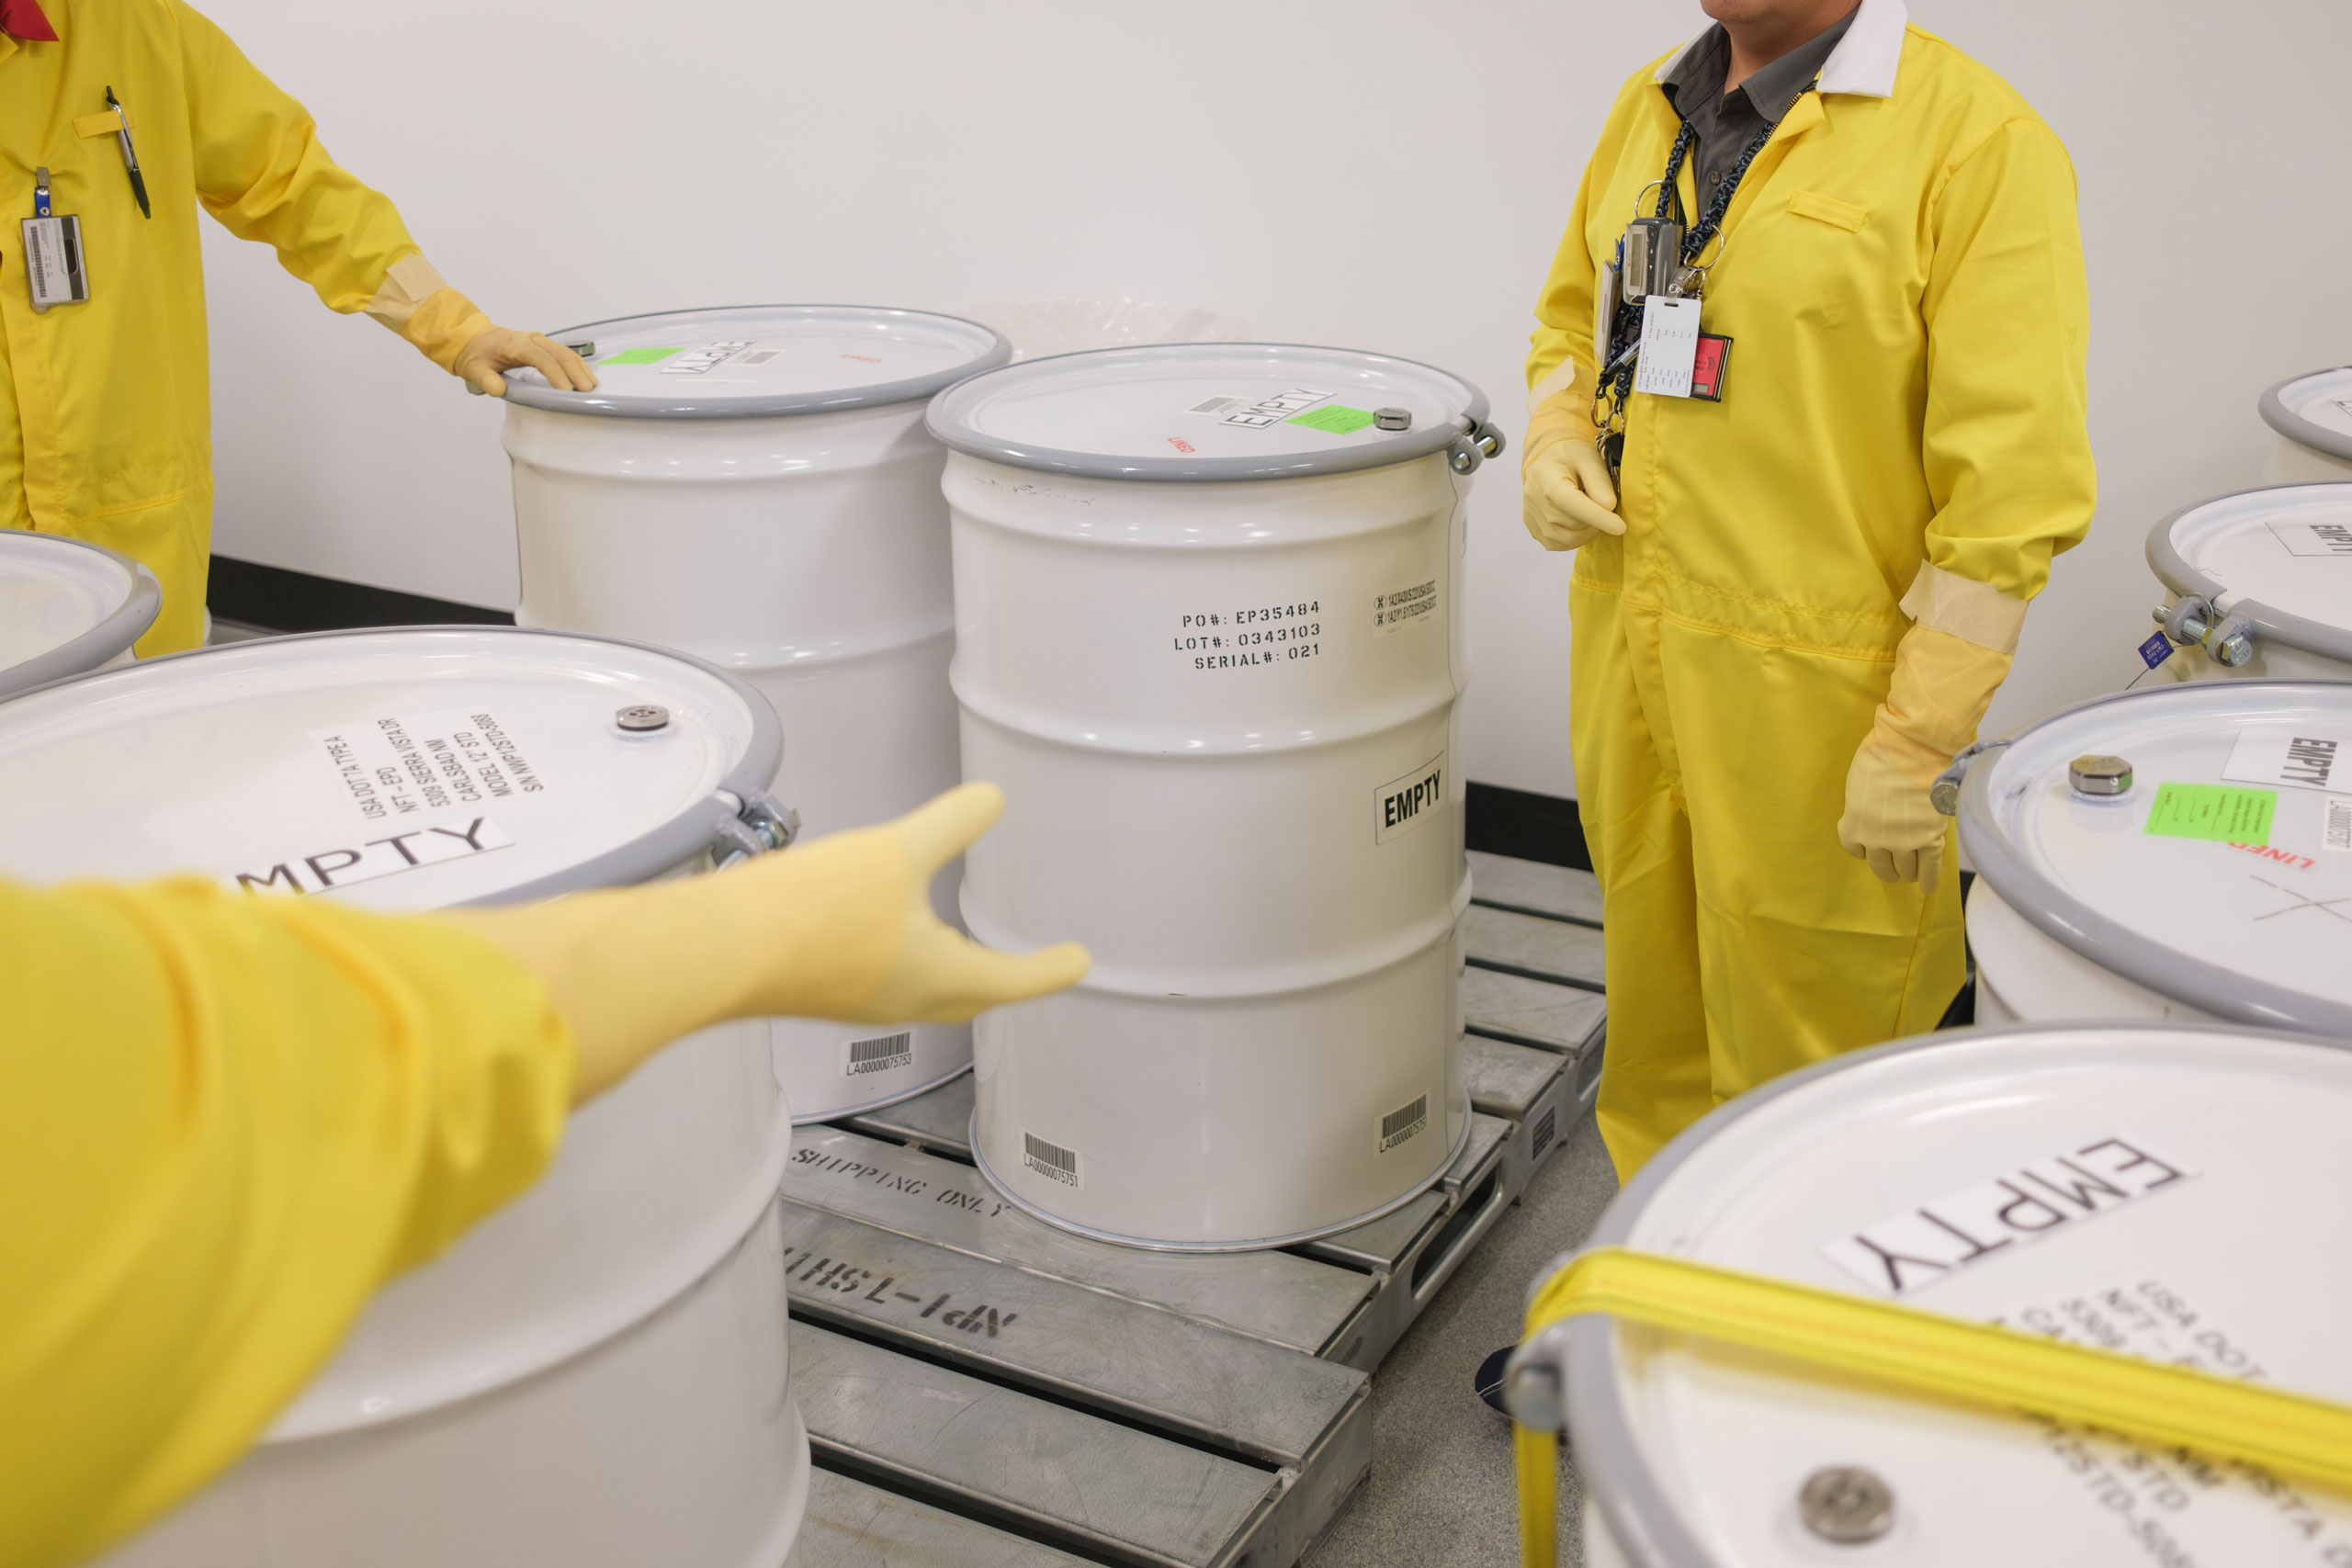 At the New Employee Training (NET) facility of the Los Alamos National Laboratory (LANL), empty waste drums  are set up for a “Container Handling for Waste Operators” training session. (Ramsay de Give for TIME)